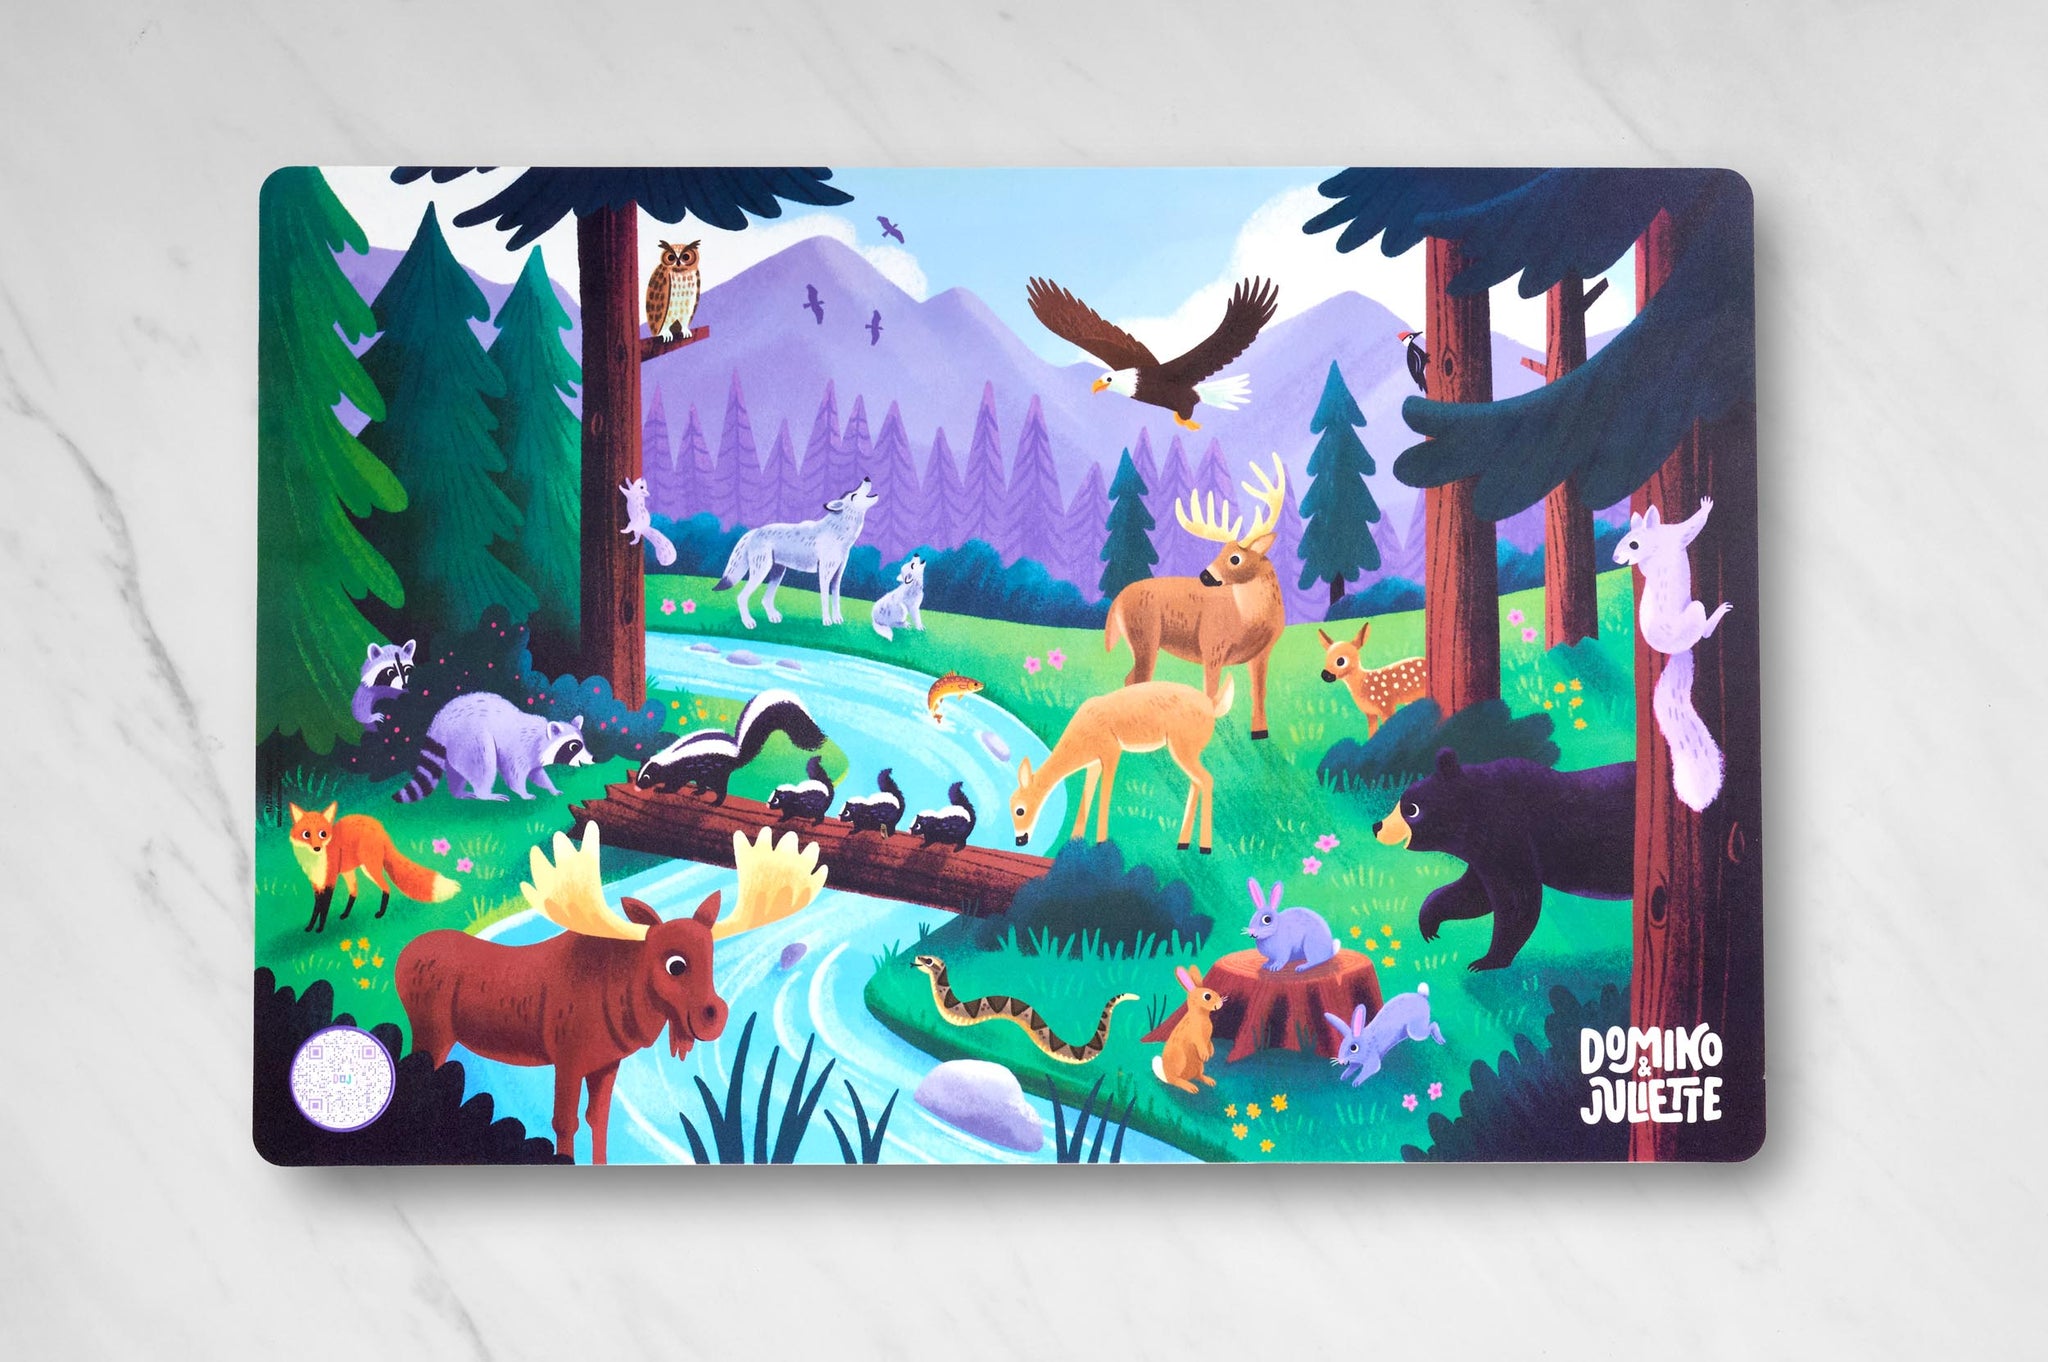 Walk in the Woods Placemat, Furry and feathered forest animal placemat, Walk in the woods placemat with forest animal illustrations, Encourages language development, early math skills, imaginative play, Perfect for indoor activities for 2-year-olds, preschoolers and kindergartners, Provides engaging and educational activities for children, Great ideas for what to play with 2-year-olds and what to do with a 19-month-old at home.